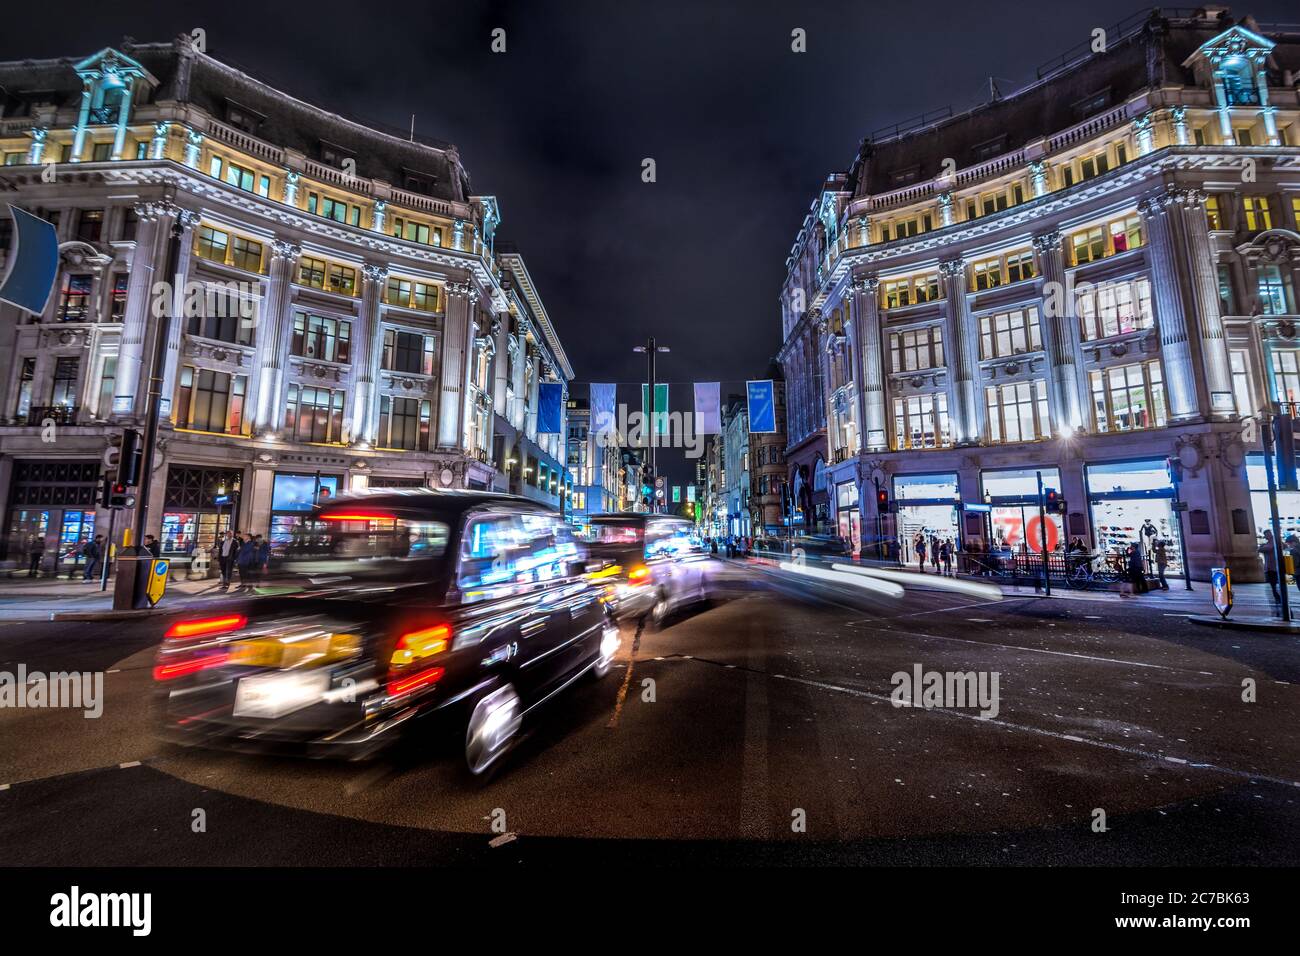 London, United Kingdom. Circa August 2017. London black cab. Pedestrian and traffic in Oxford Circus at night Stock Photo